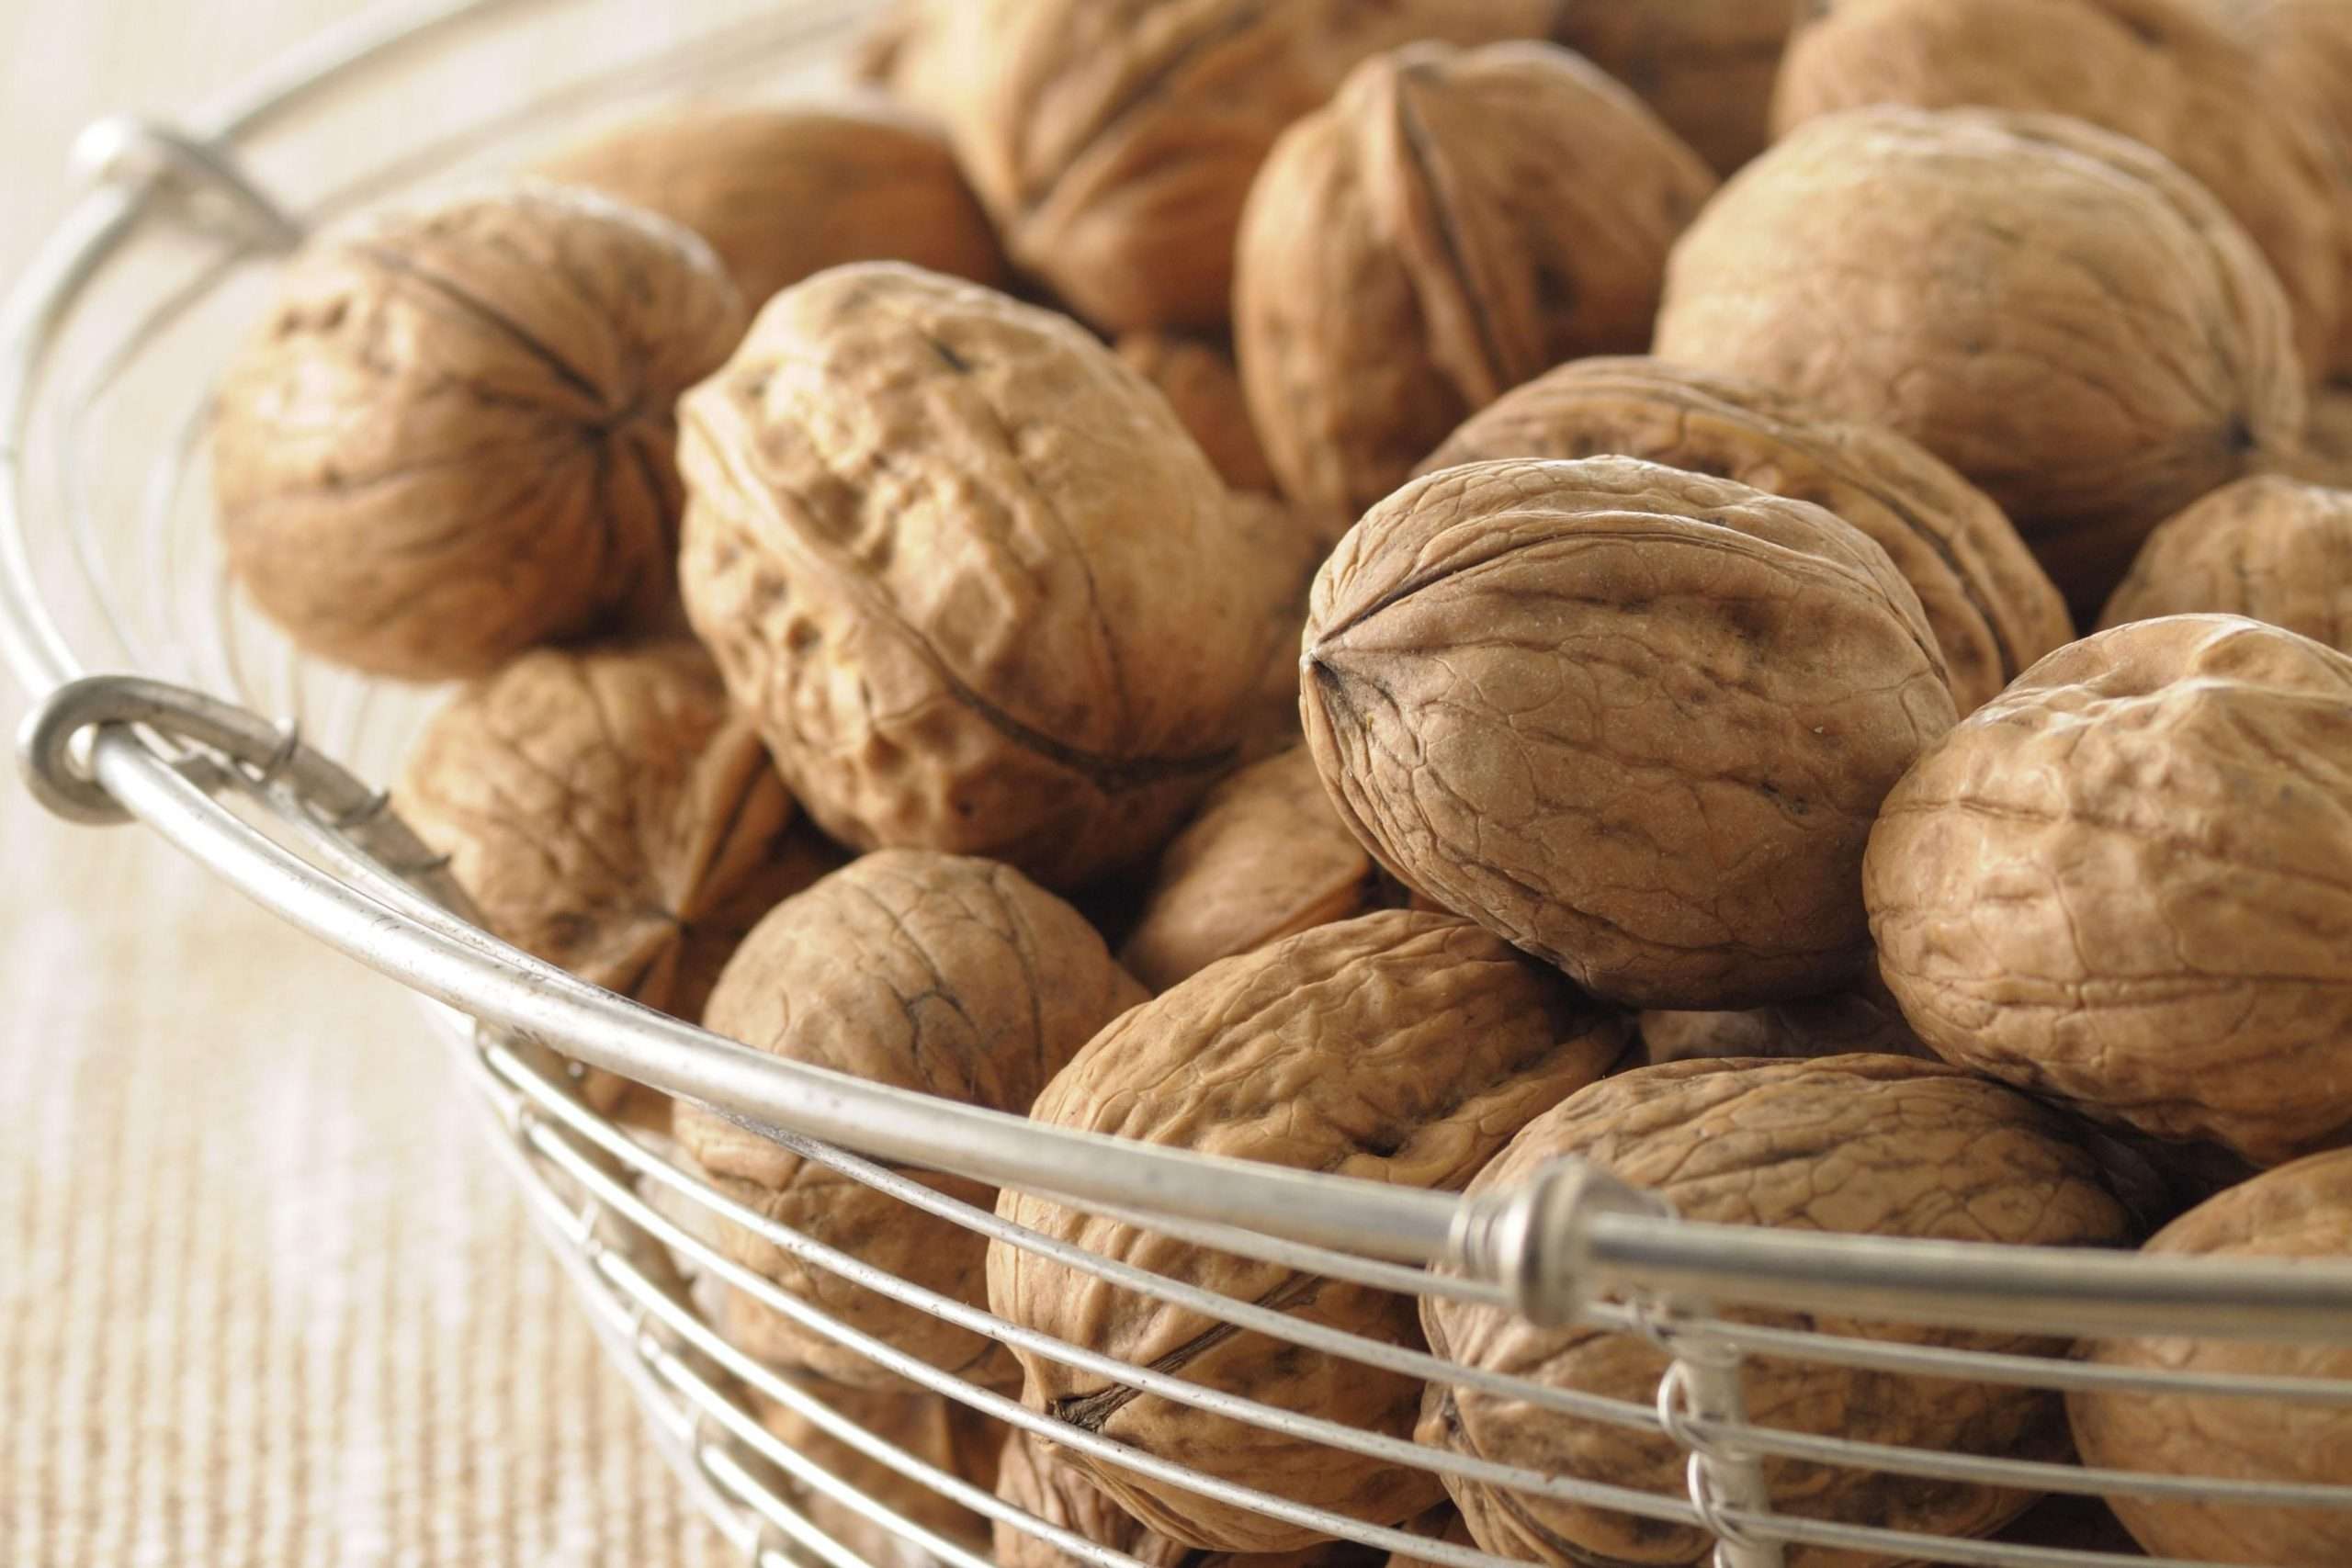 Can Eating Walnuts Help Lower Your Cholesterol?